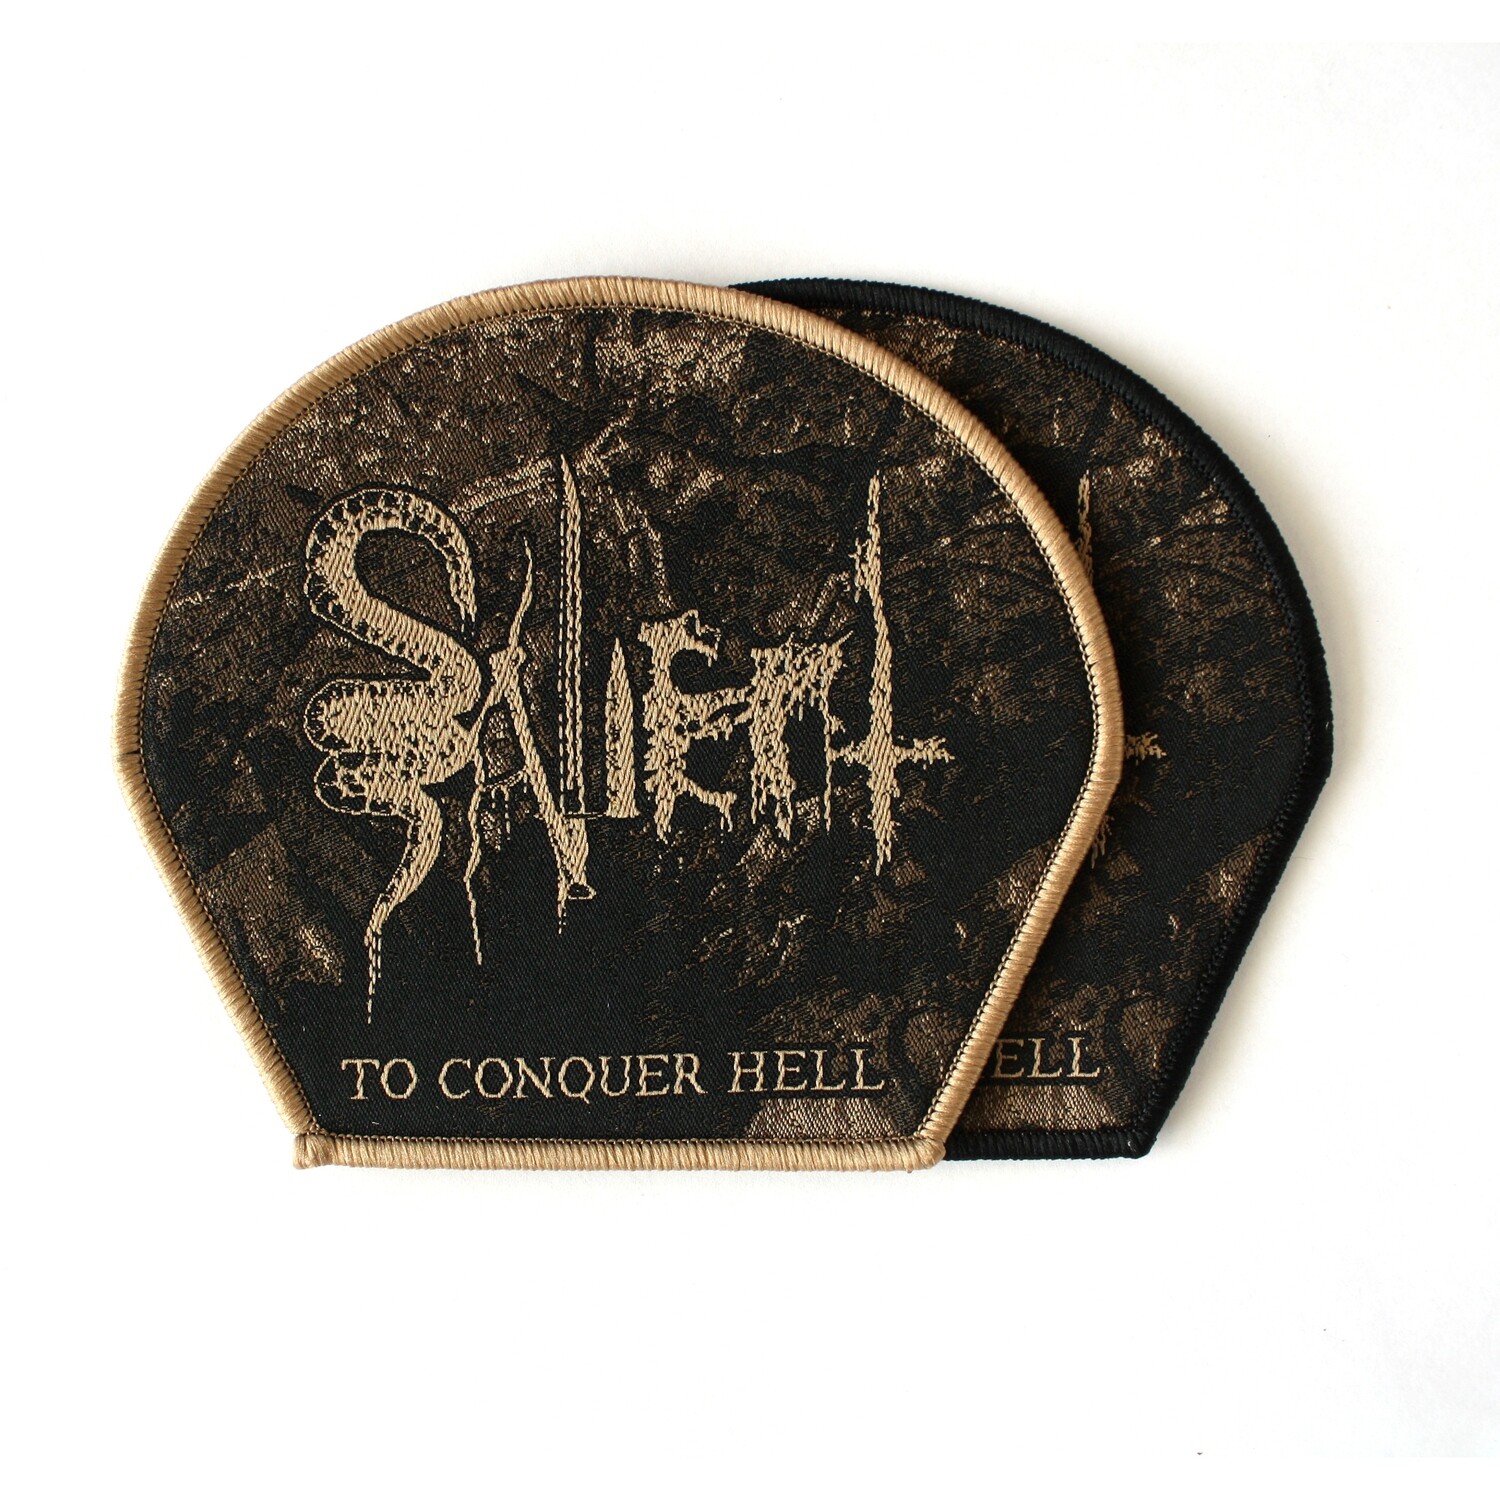 Salient - To Conquer Hell